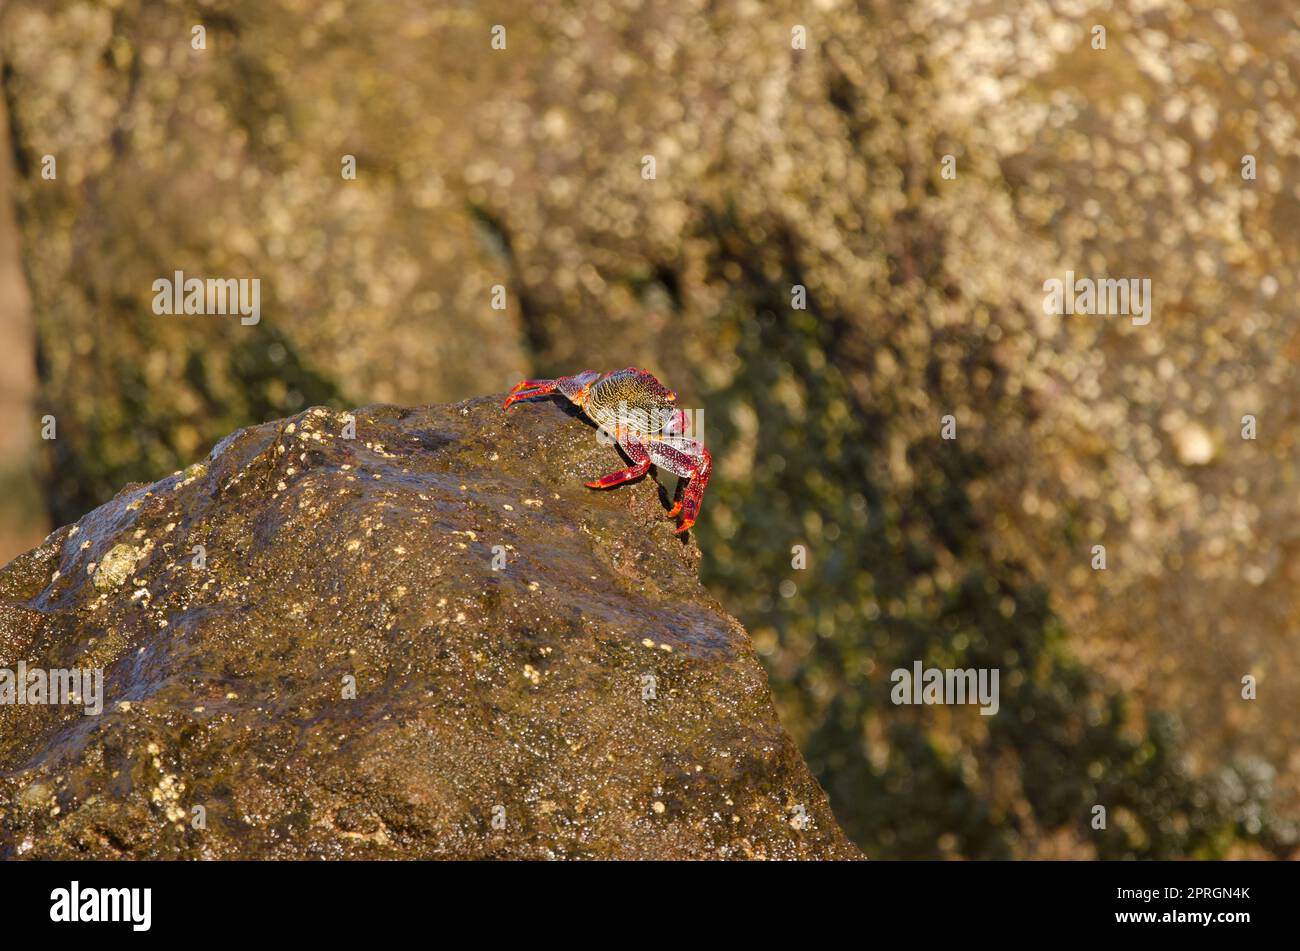 Crab on a rock of the coast. Stock Photo